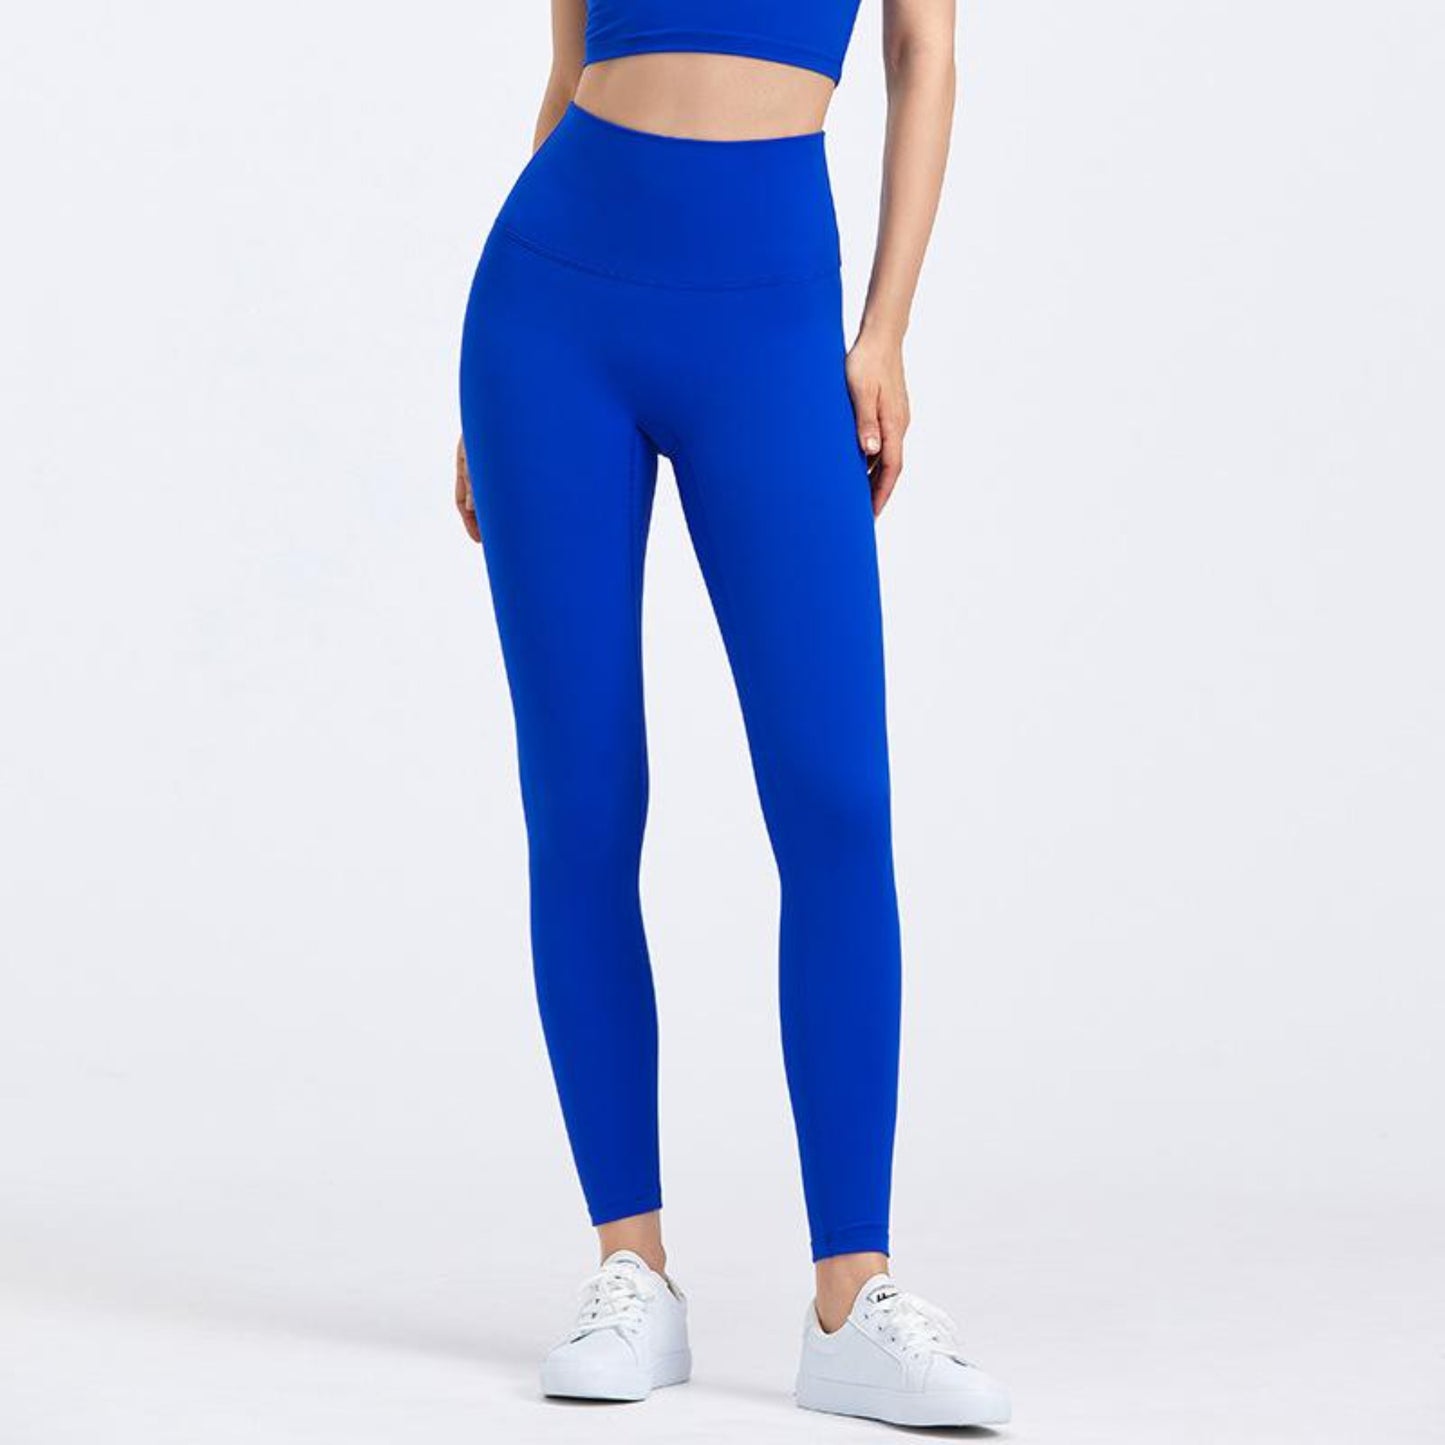 ELECTRIC BLUE, HIGH RISE AND SQUAT PROOF LEGGINGS WORN BY MODEL ON A WHITE BACKGROUND